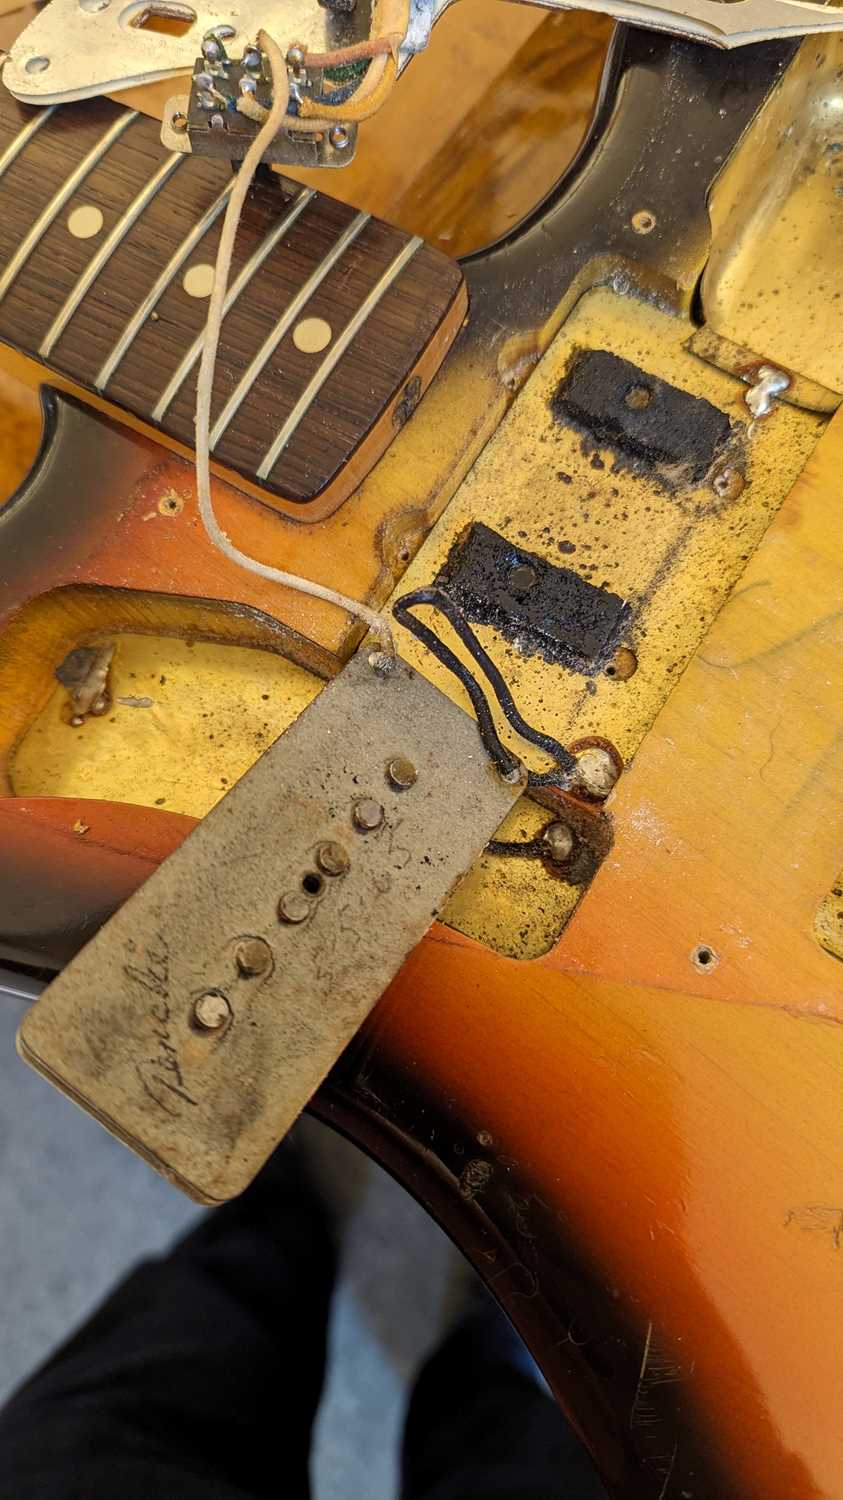 A 1965 Fender Jazzmaster electric guitar, - Image 13 of 16